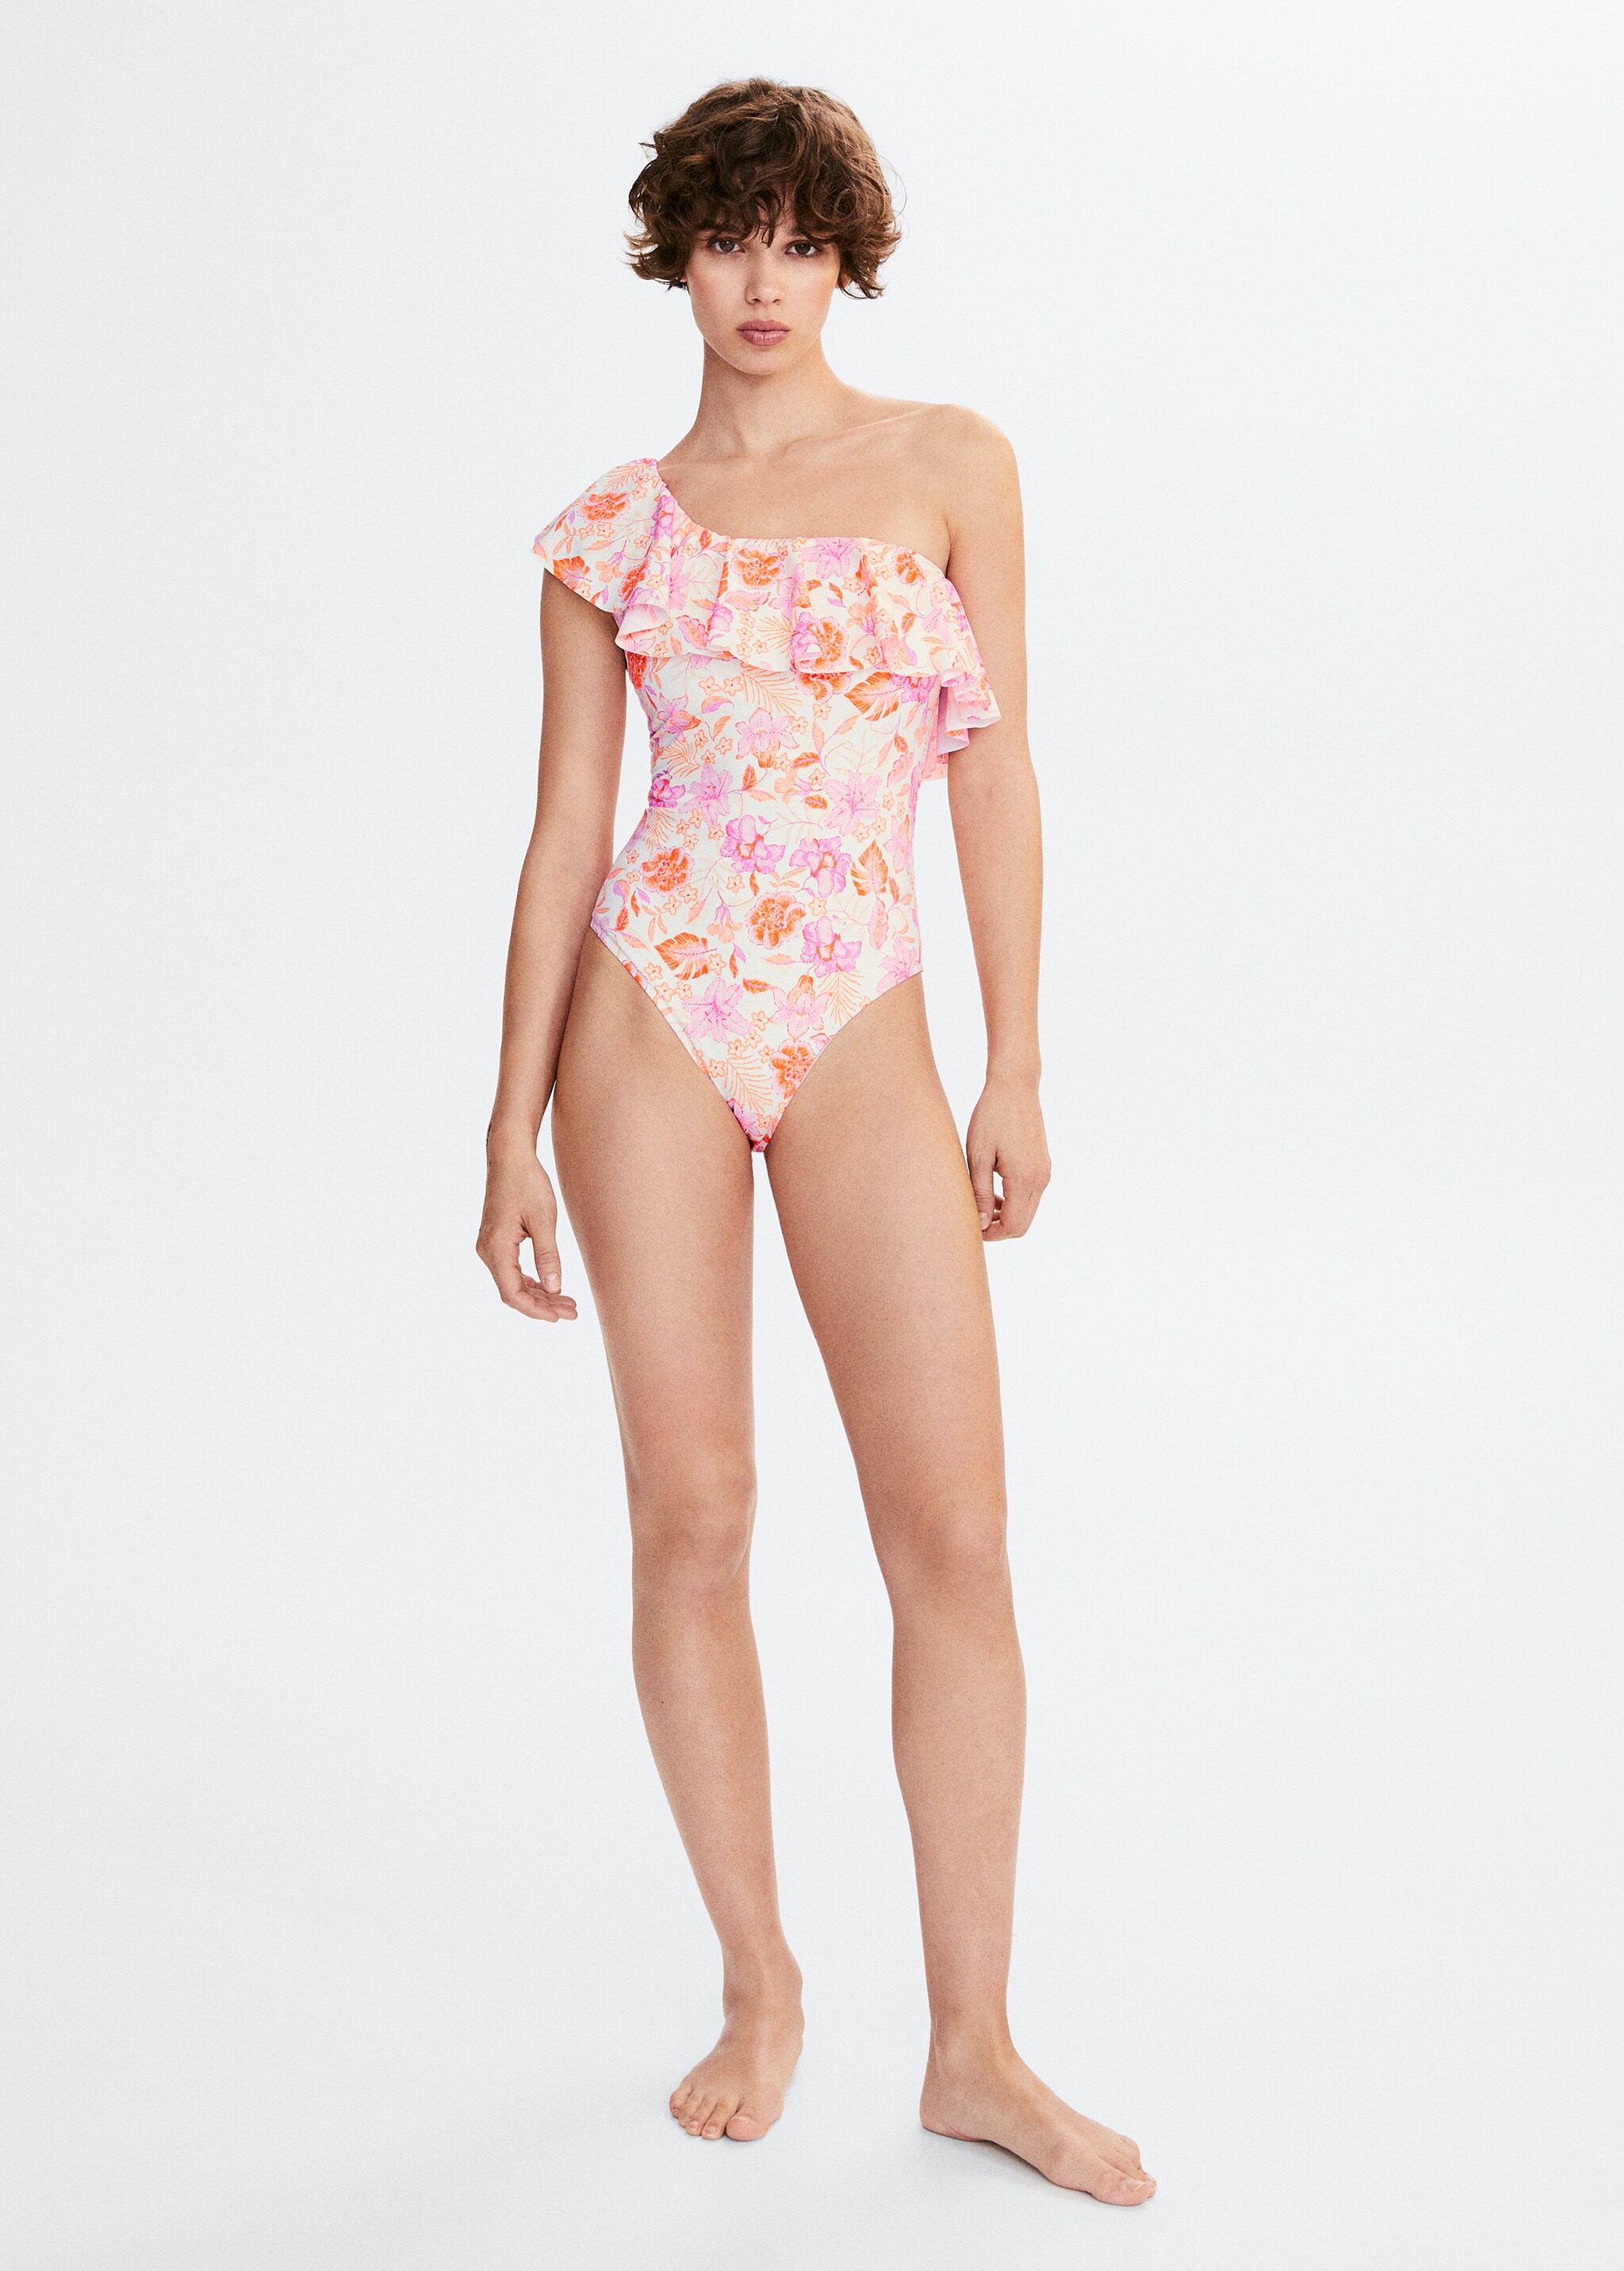 Ruffled floral print swimsuit - General plane